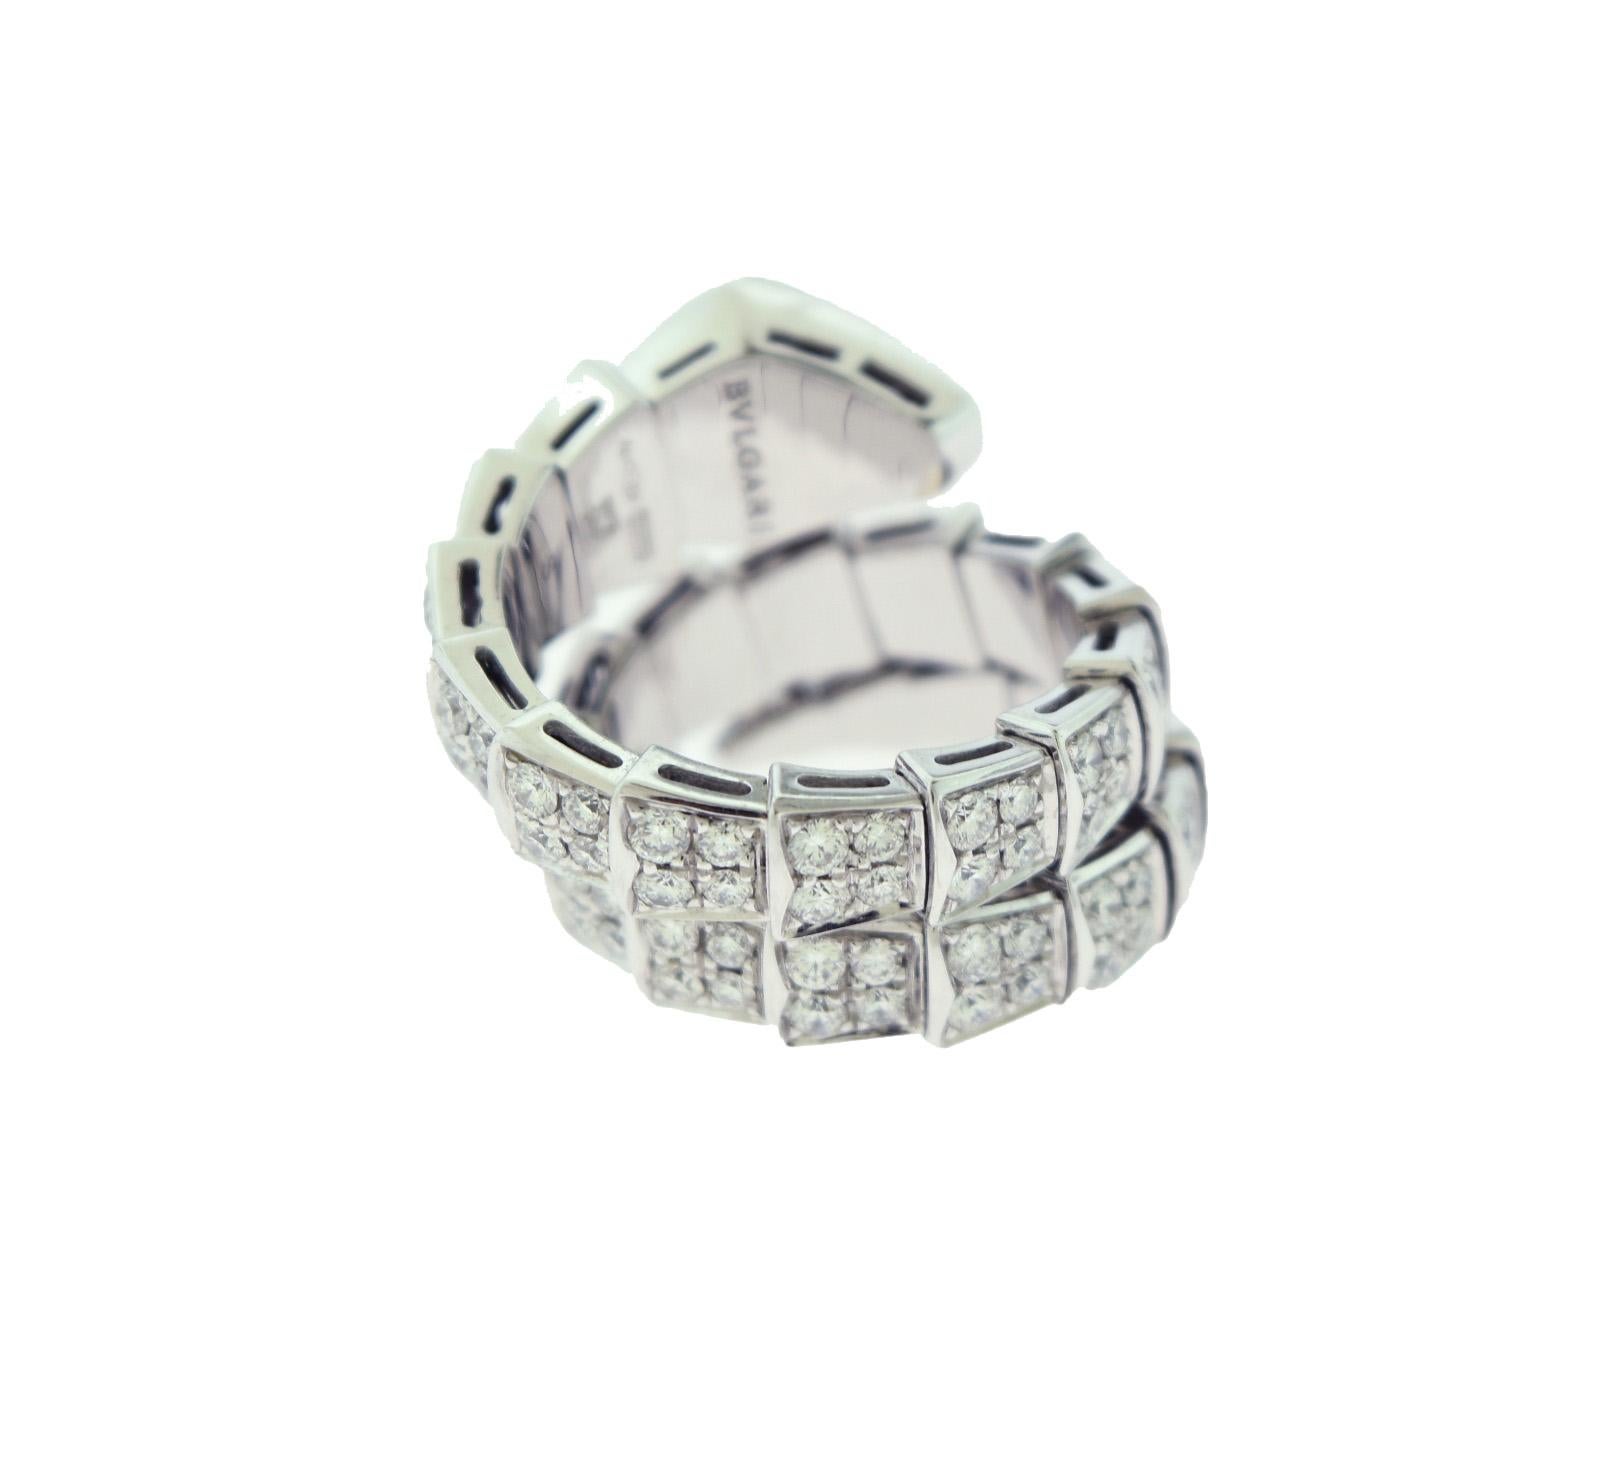 Brilliance Jewels, Miami
Questions? Call Us Anytime!
786,482,8100

Brand: BVLGARI

Model Name: Serpenti

Metal: White Gold

Metal Purity: 18k

Stones: Round Brilliant Cut Diamonds

Total Carat Weight: approx. 3.0 ct

Size: M

Total Item Weight